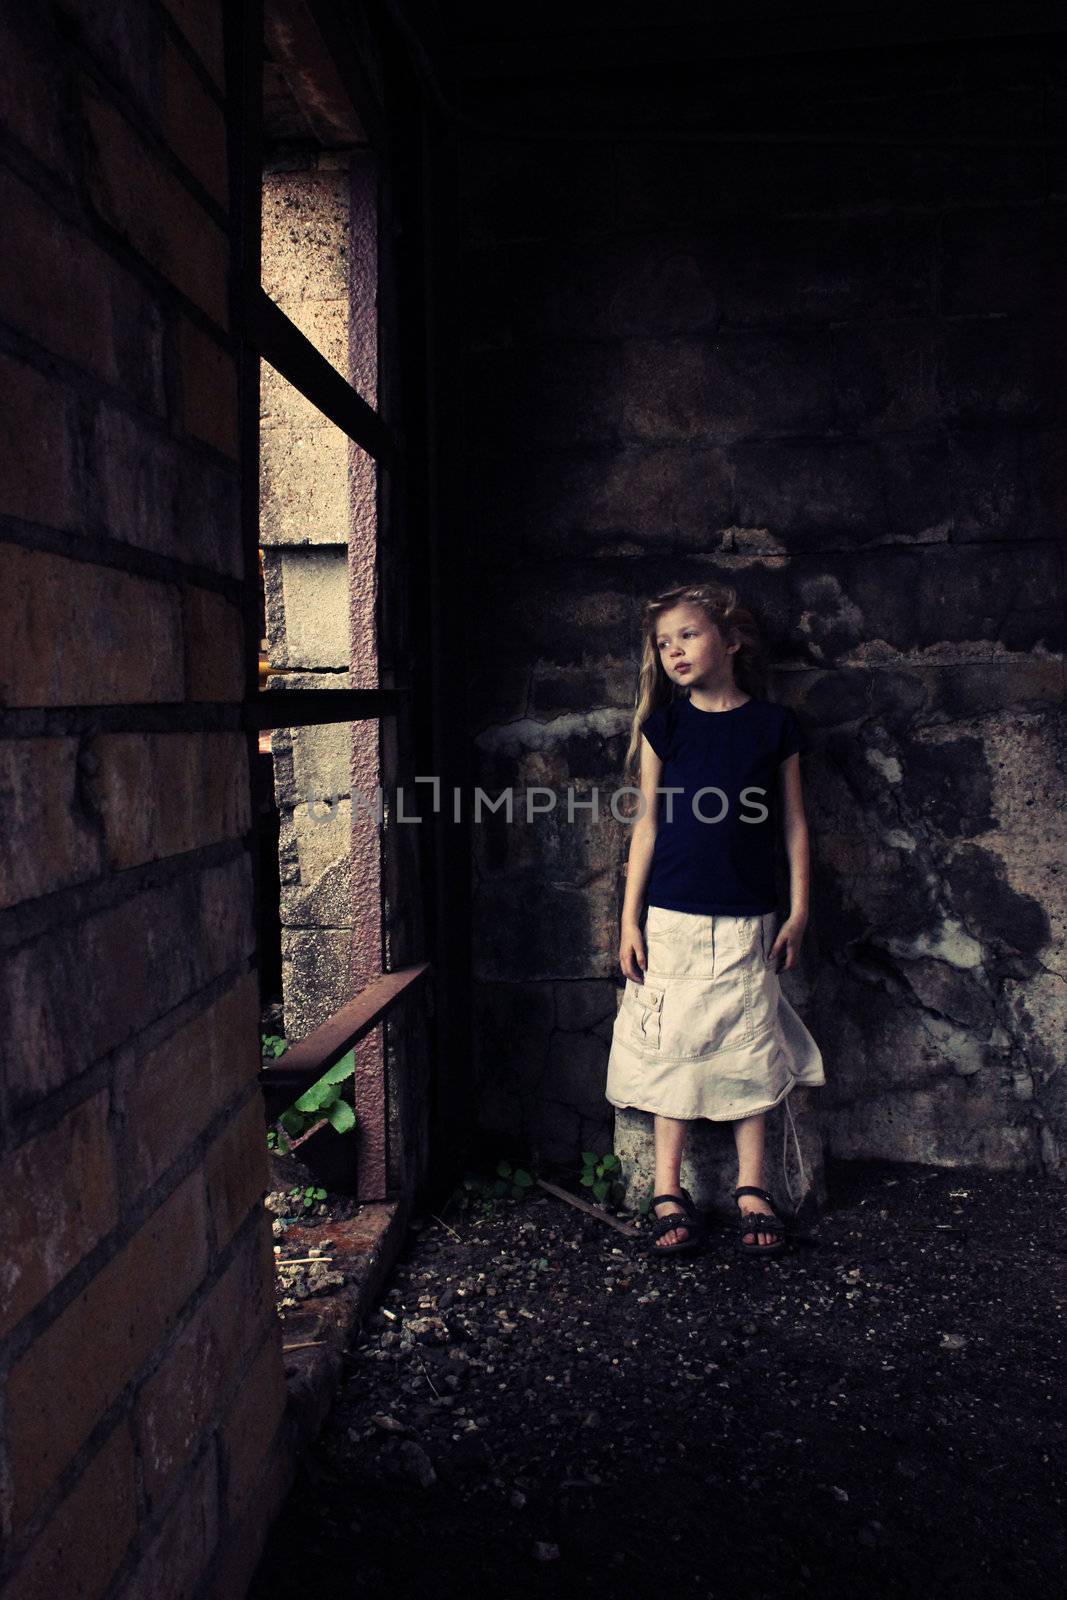 A young girl looking out the window in a grungy building